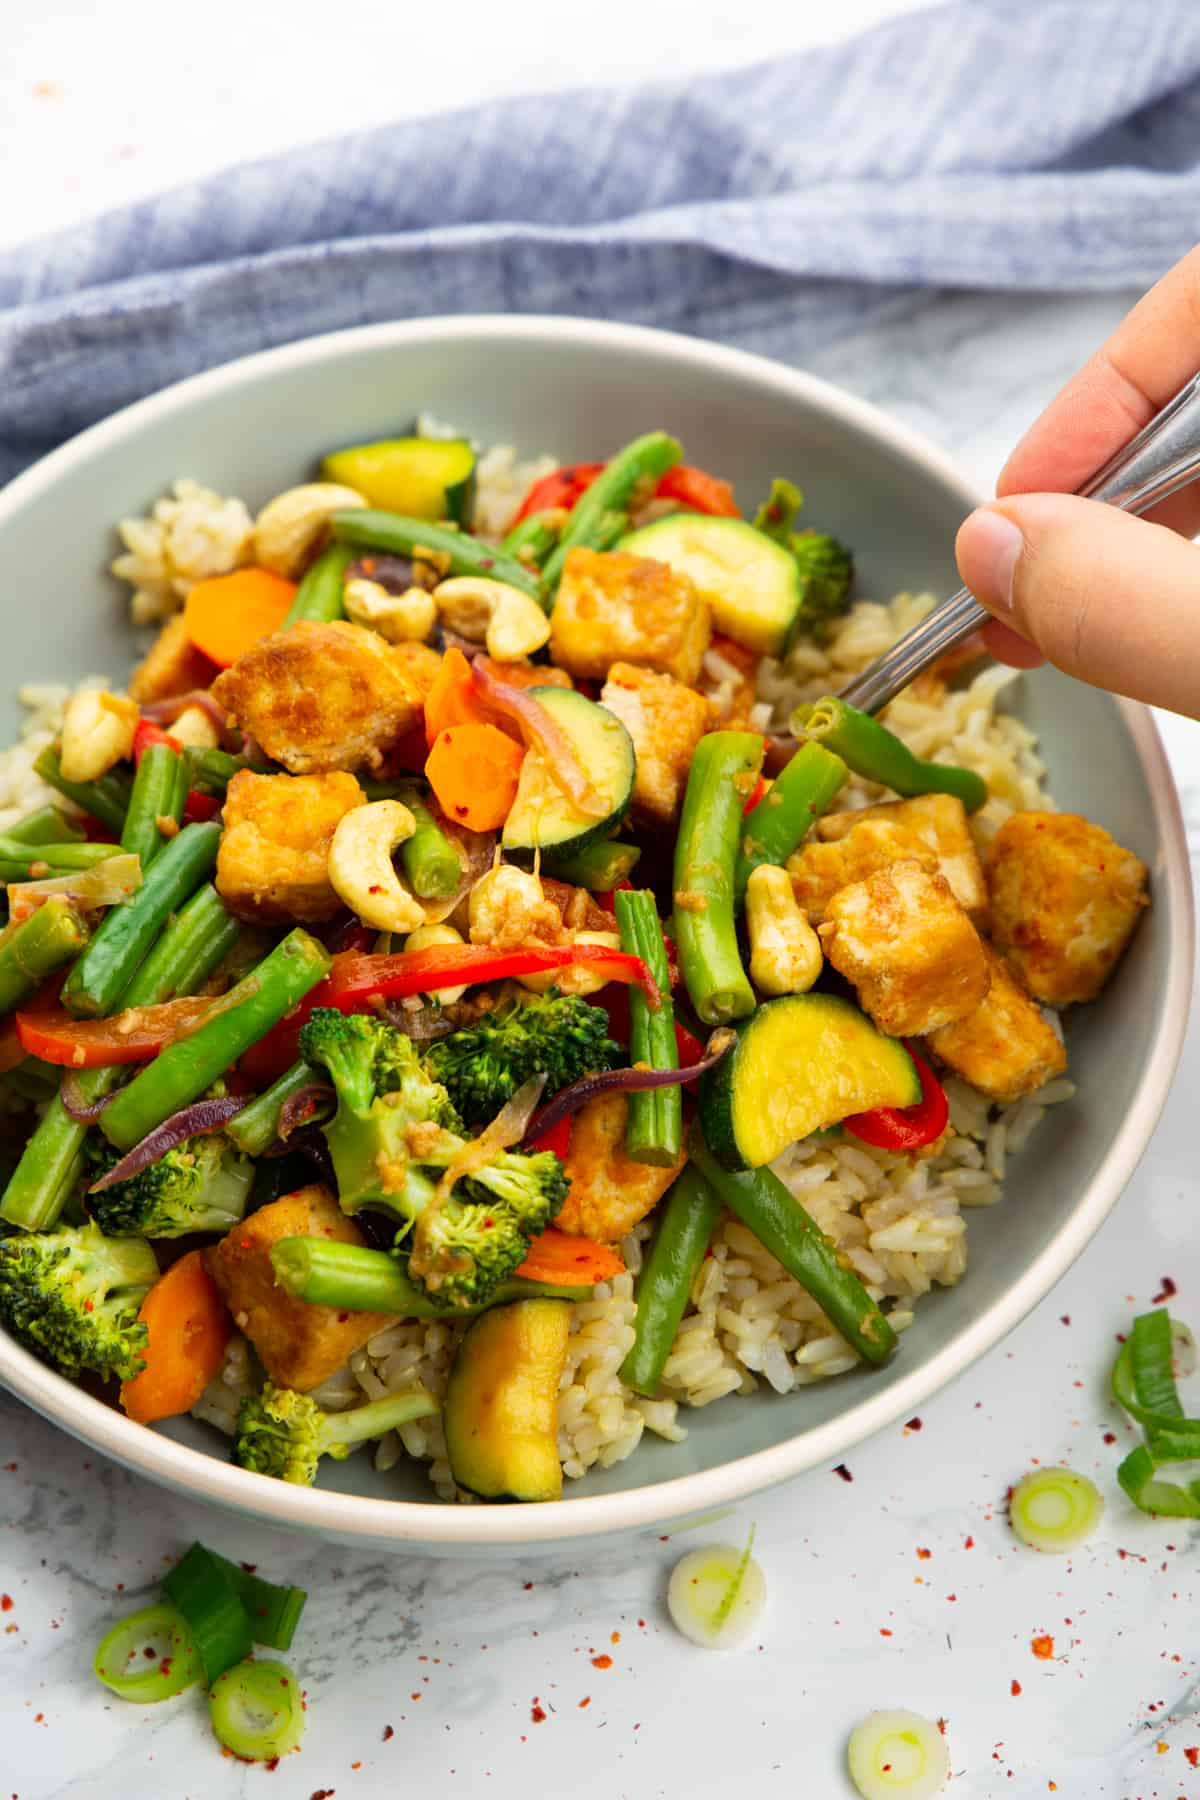 a grey bowl with brown rice and tofu stir fry with a hand holding a fork